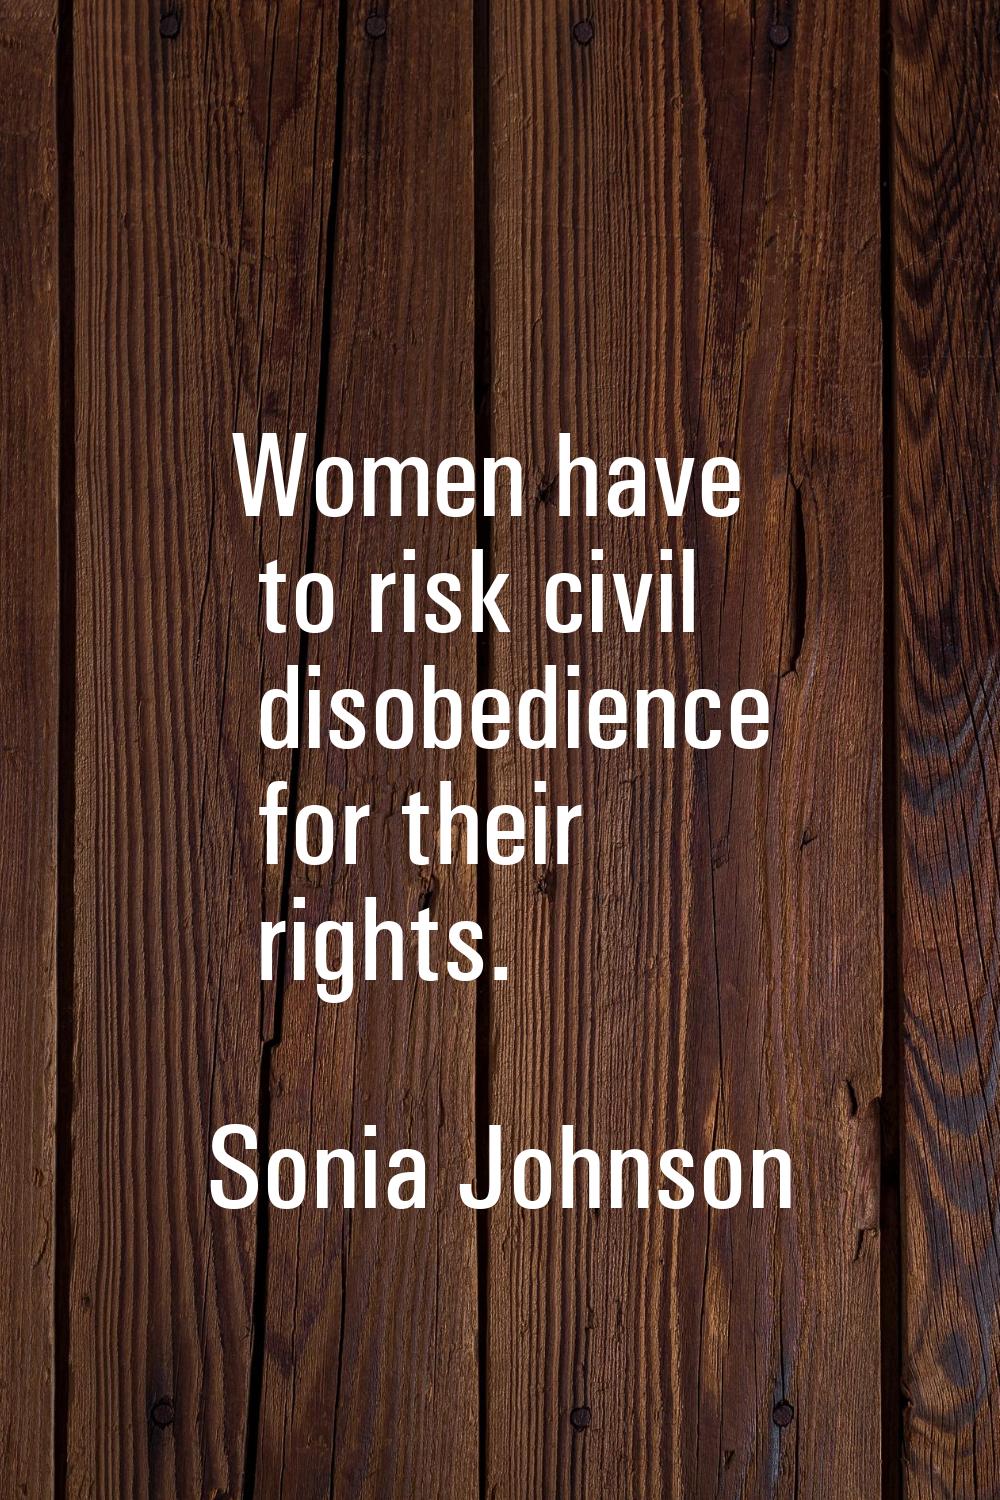 Women have to risk civil disobedience for their rights.